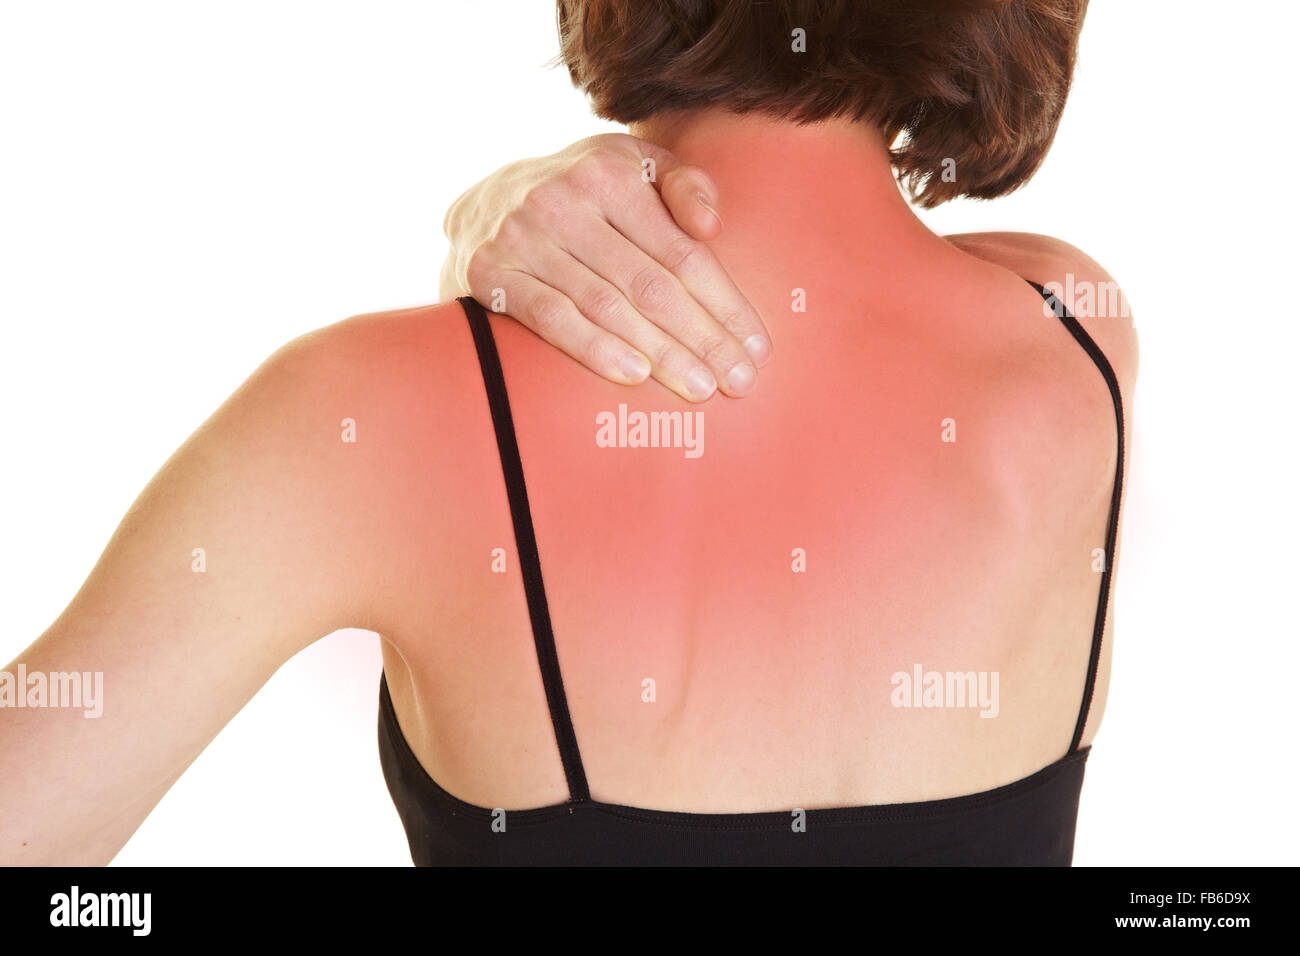 Young woman massaging her red aching back Stock Photo